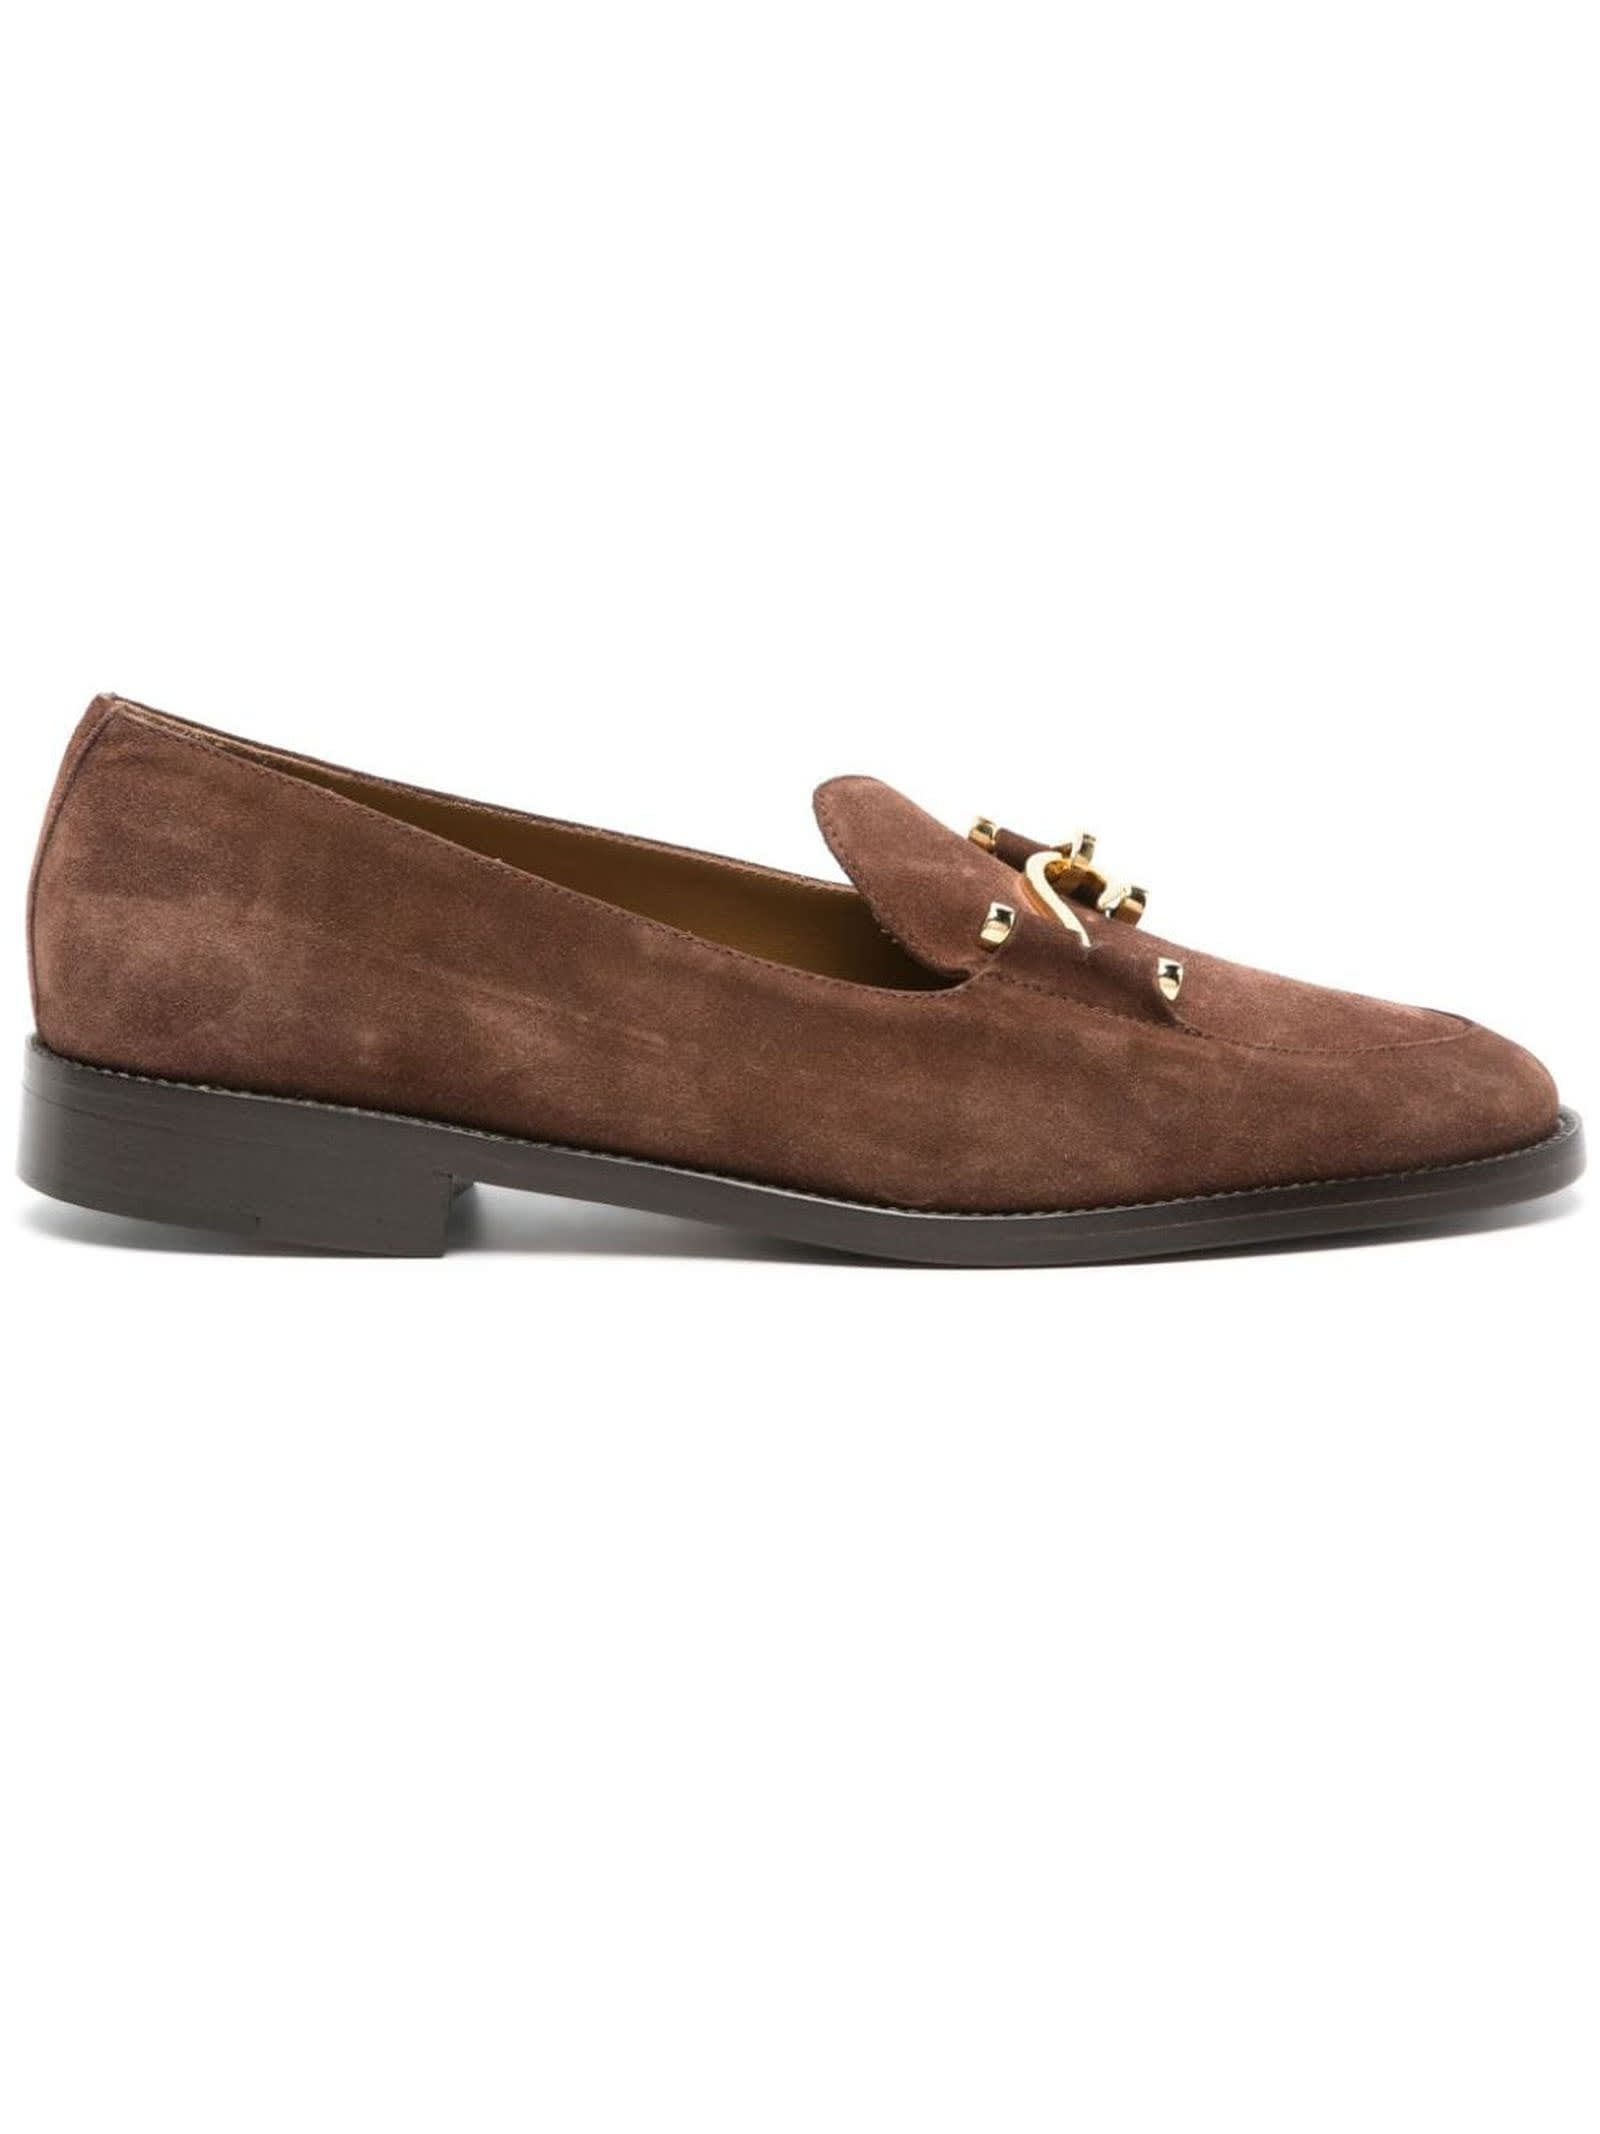 Edhen Milano Brown Suede Comporta Loafers